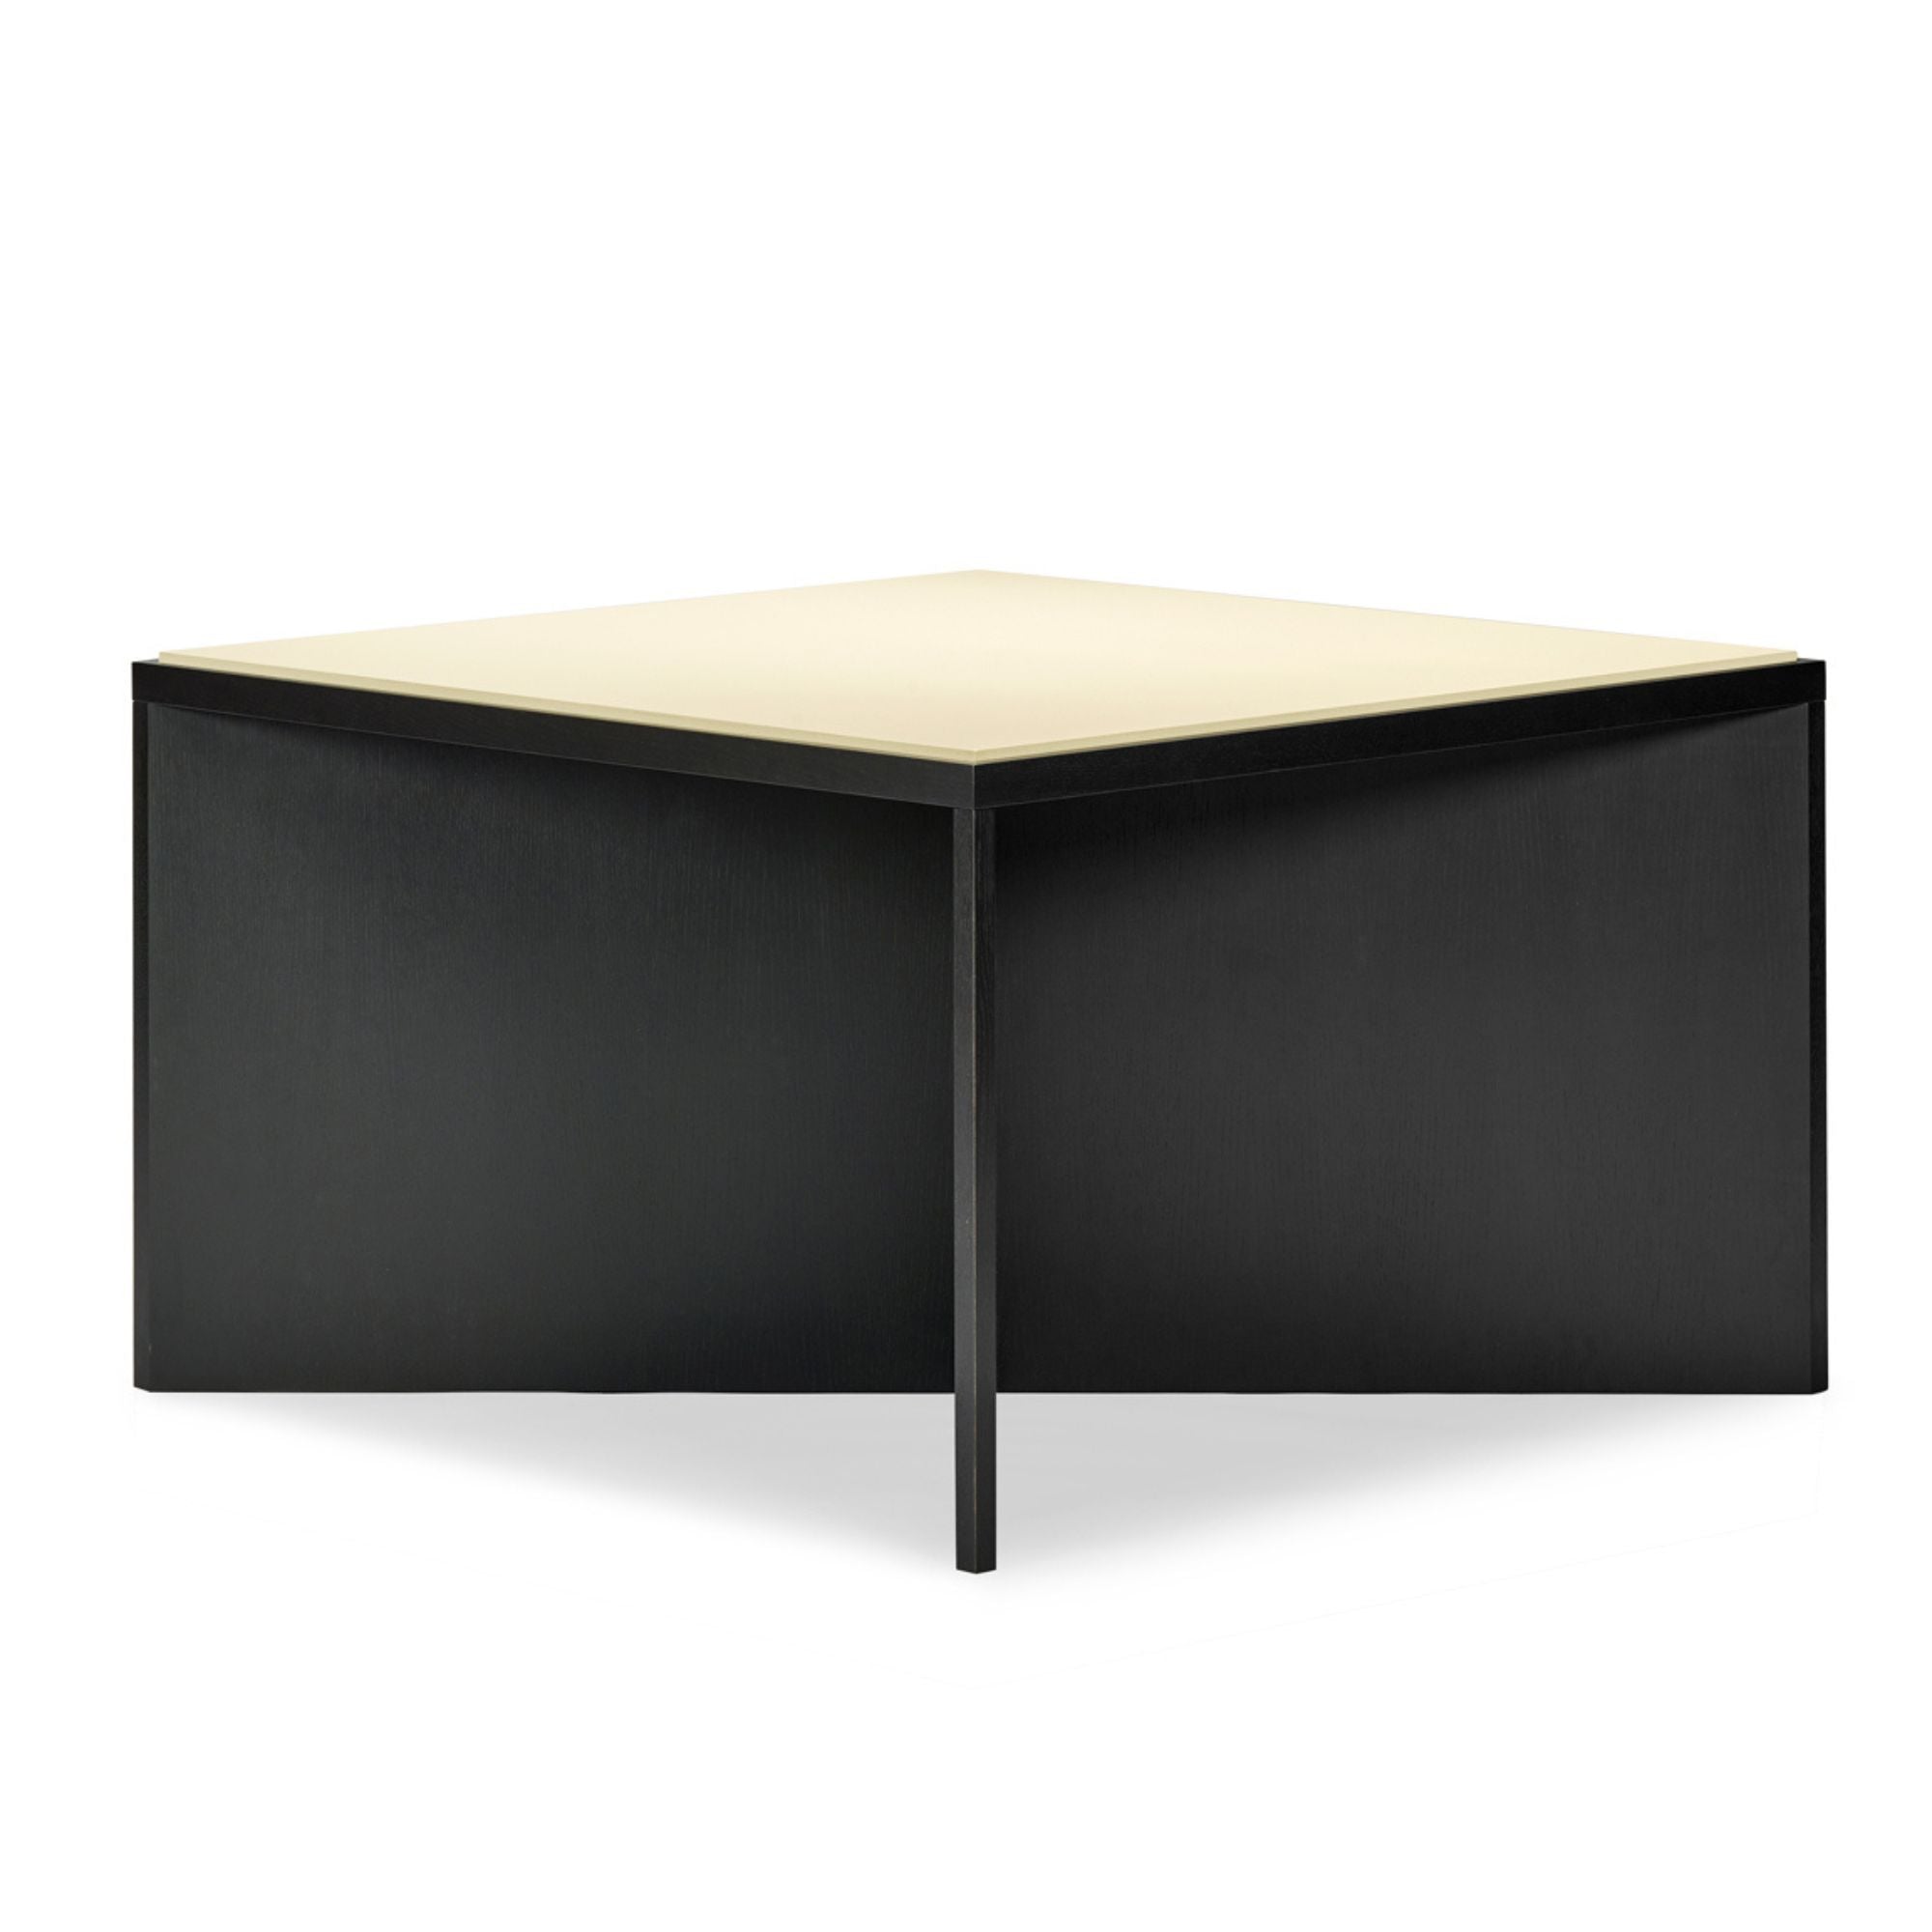 Kubé 1 Dining Table - THAT COOL LIVING